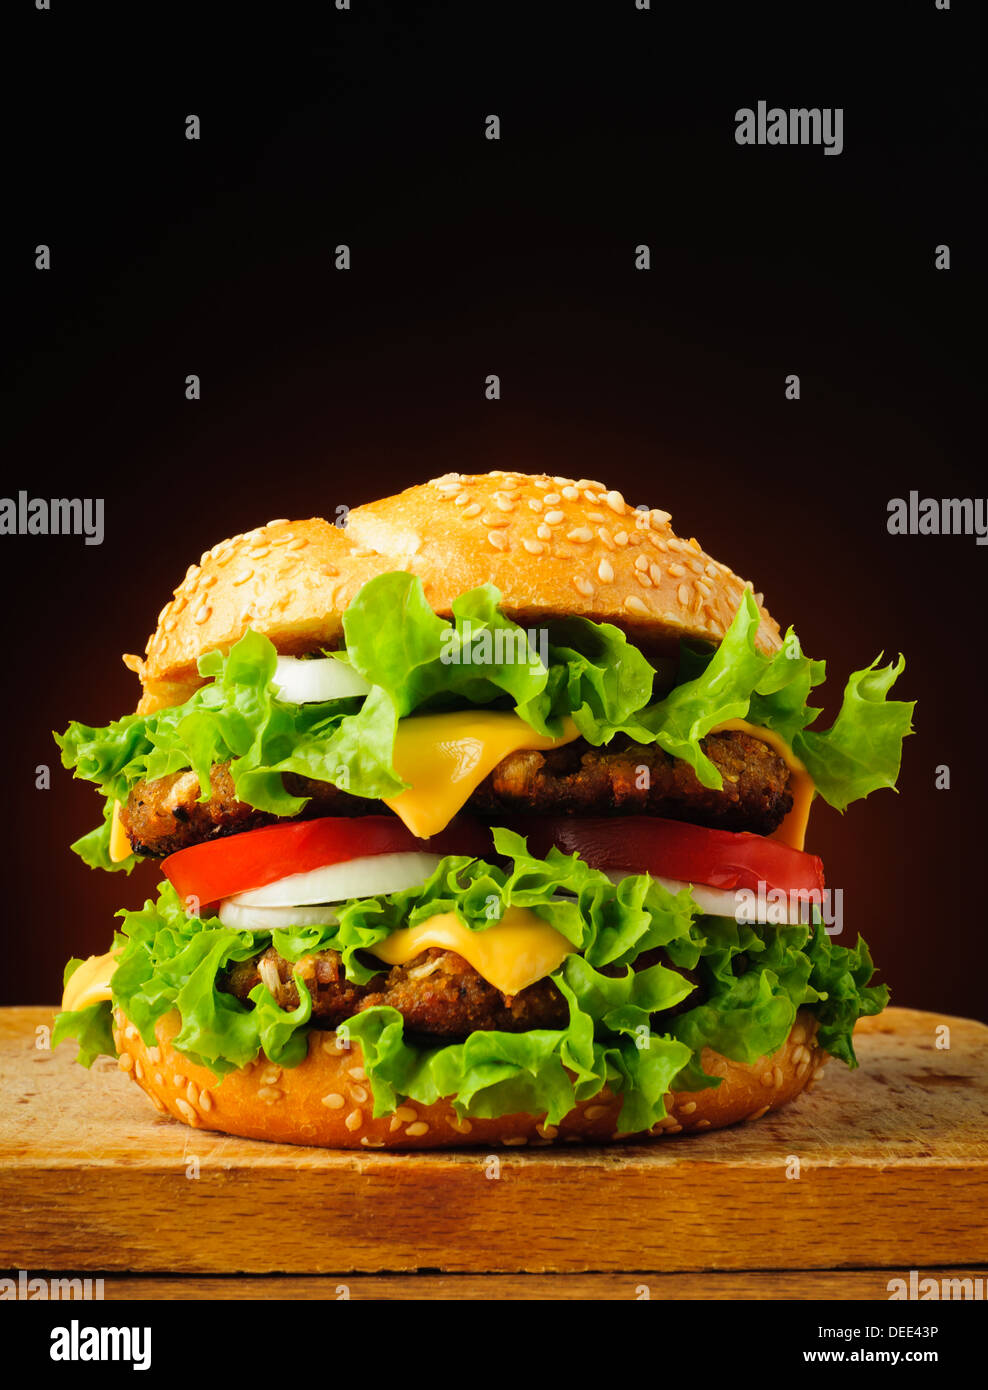 fast food with big tasty traditional double cheeseburger or hamburger Stock Photo